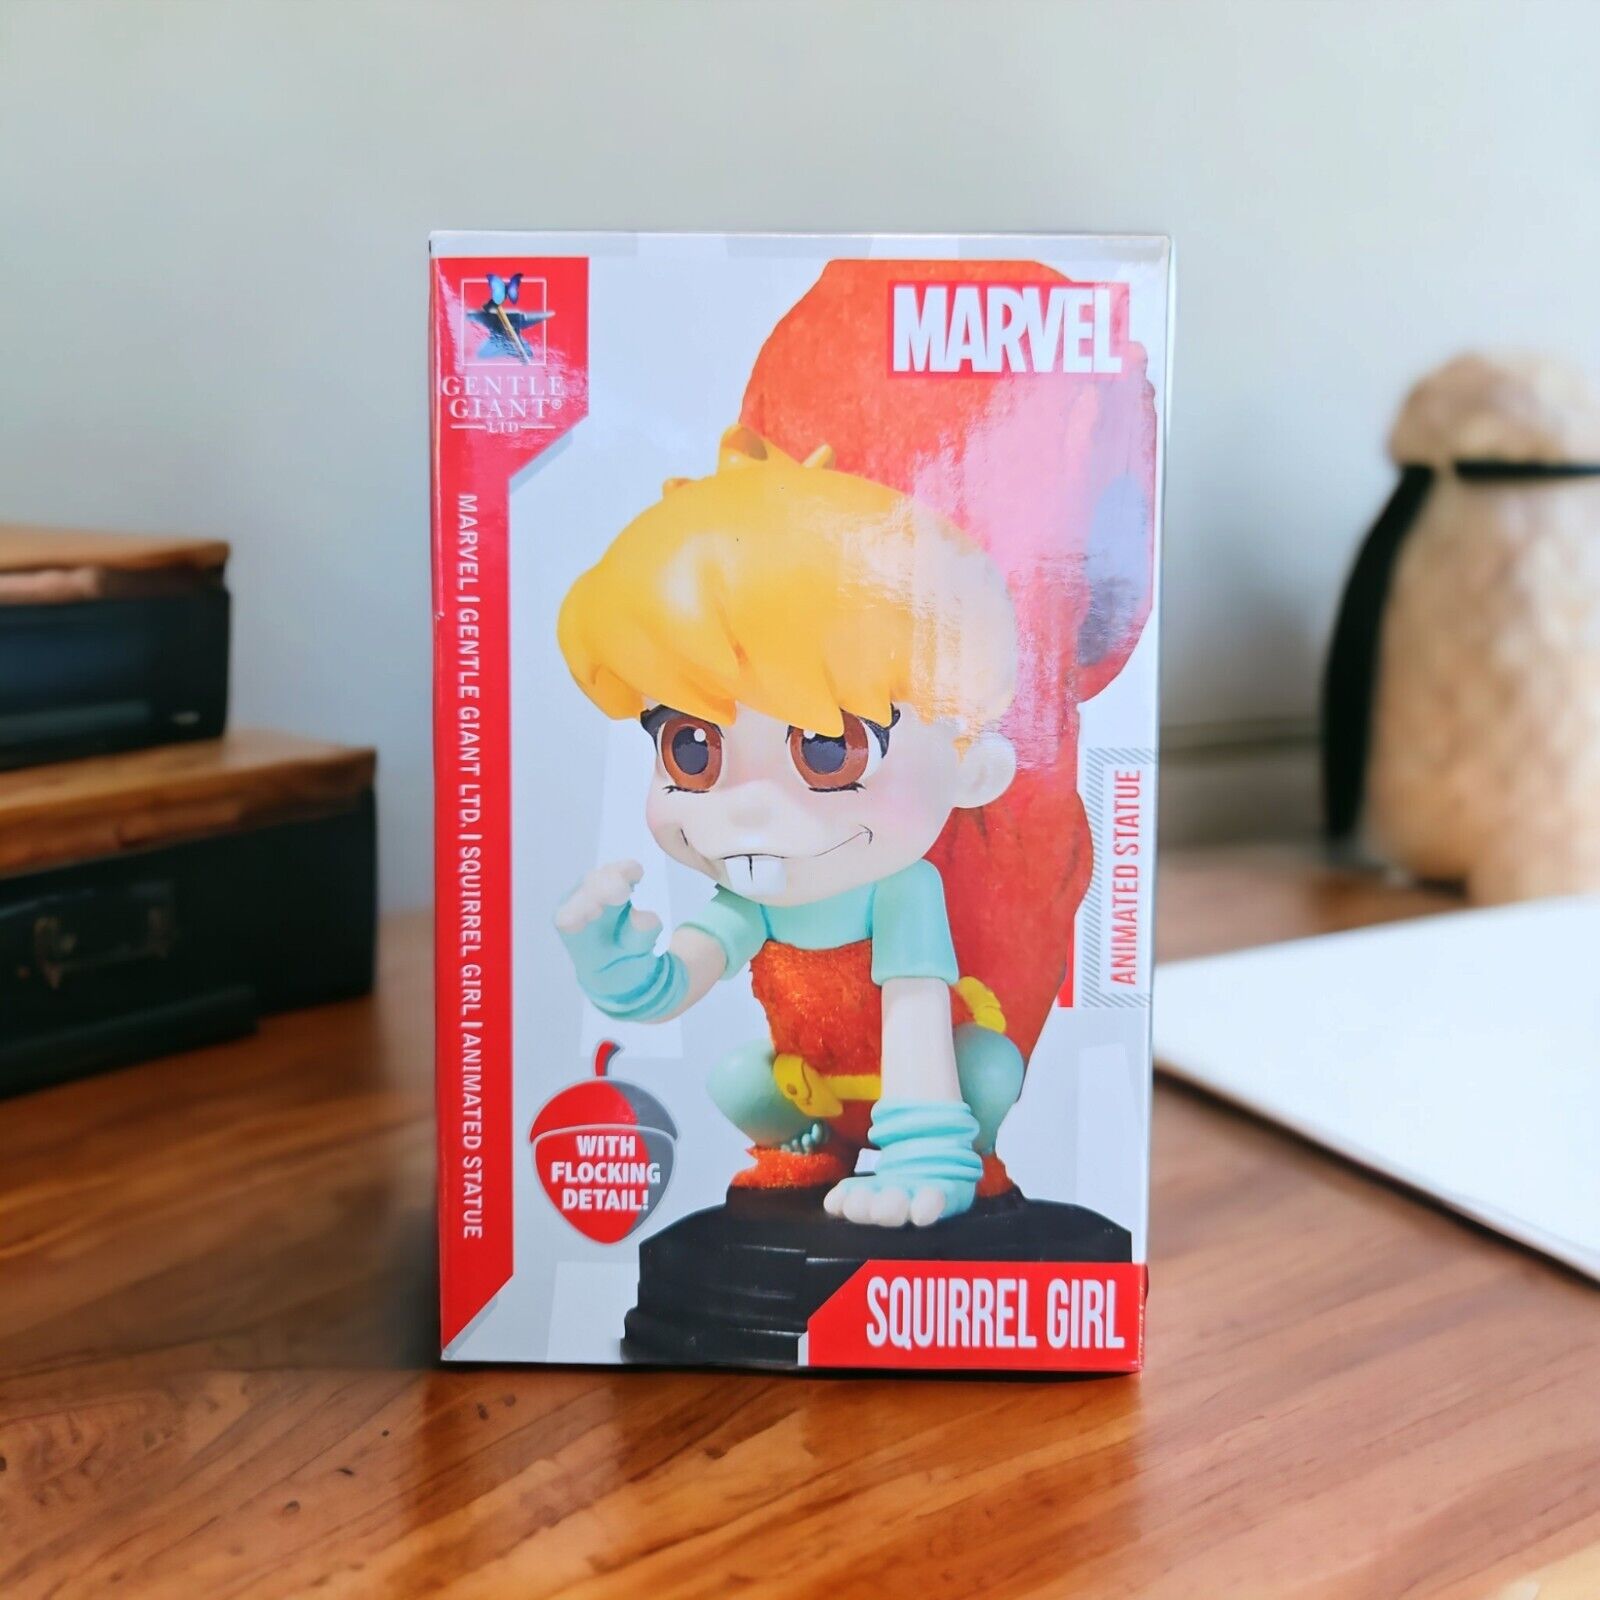 Gentle Giant - Marvel - Squirrel Girl Animated Statue - Ltd Edition #1178/2000 